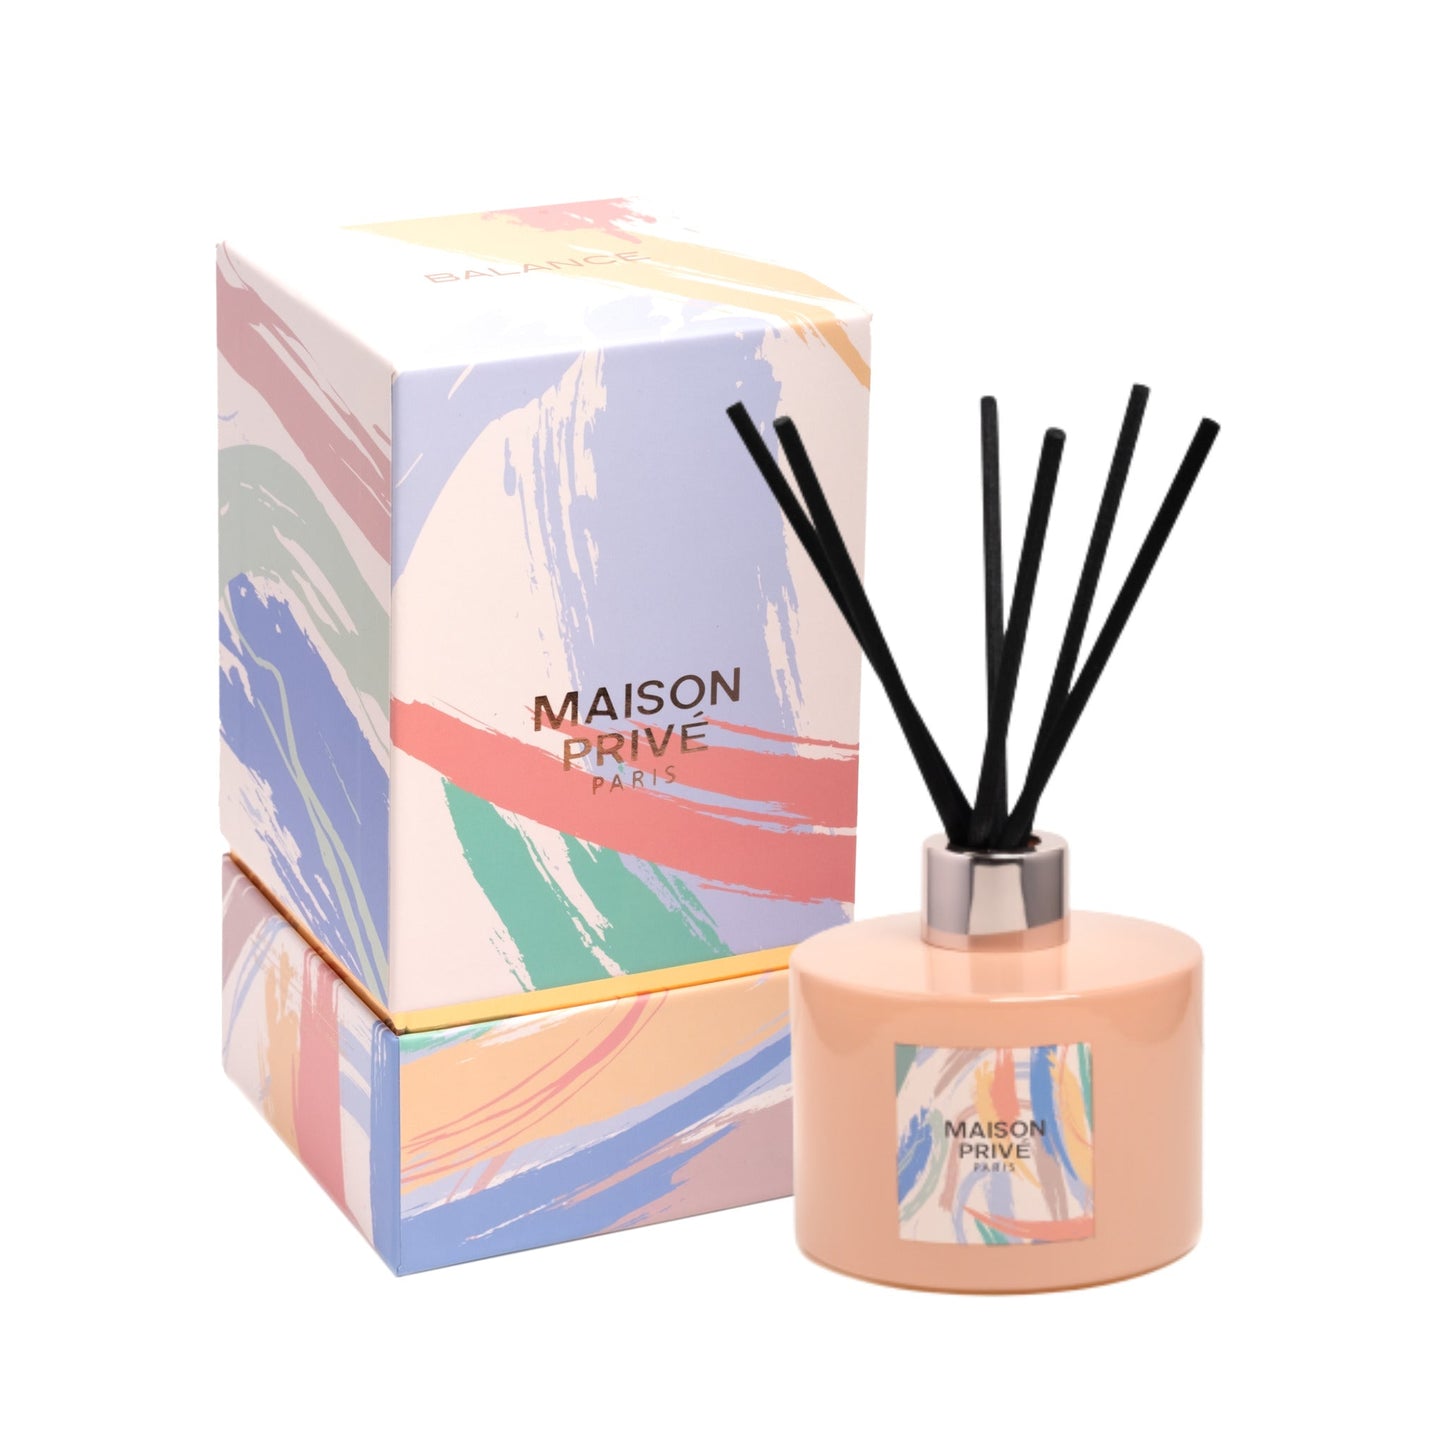 
                  
                    AMBERGRIS & PATCHOULI "BALANCE" | Reed diffuser | 180ml
                  
                